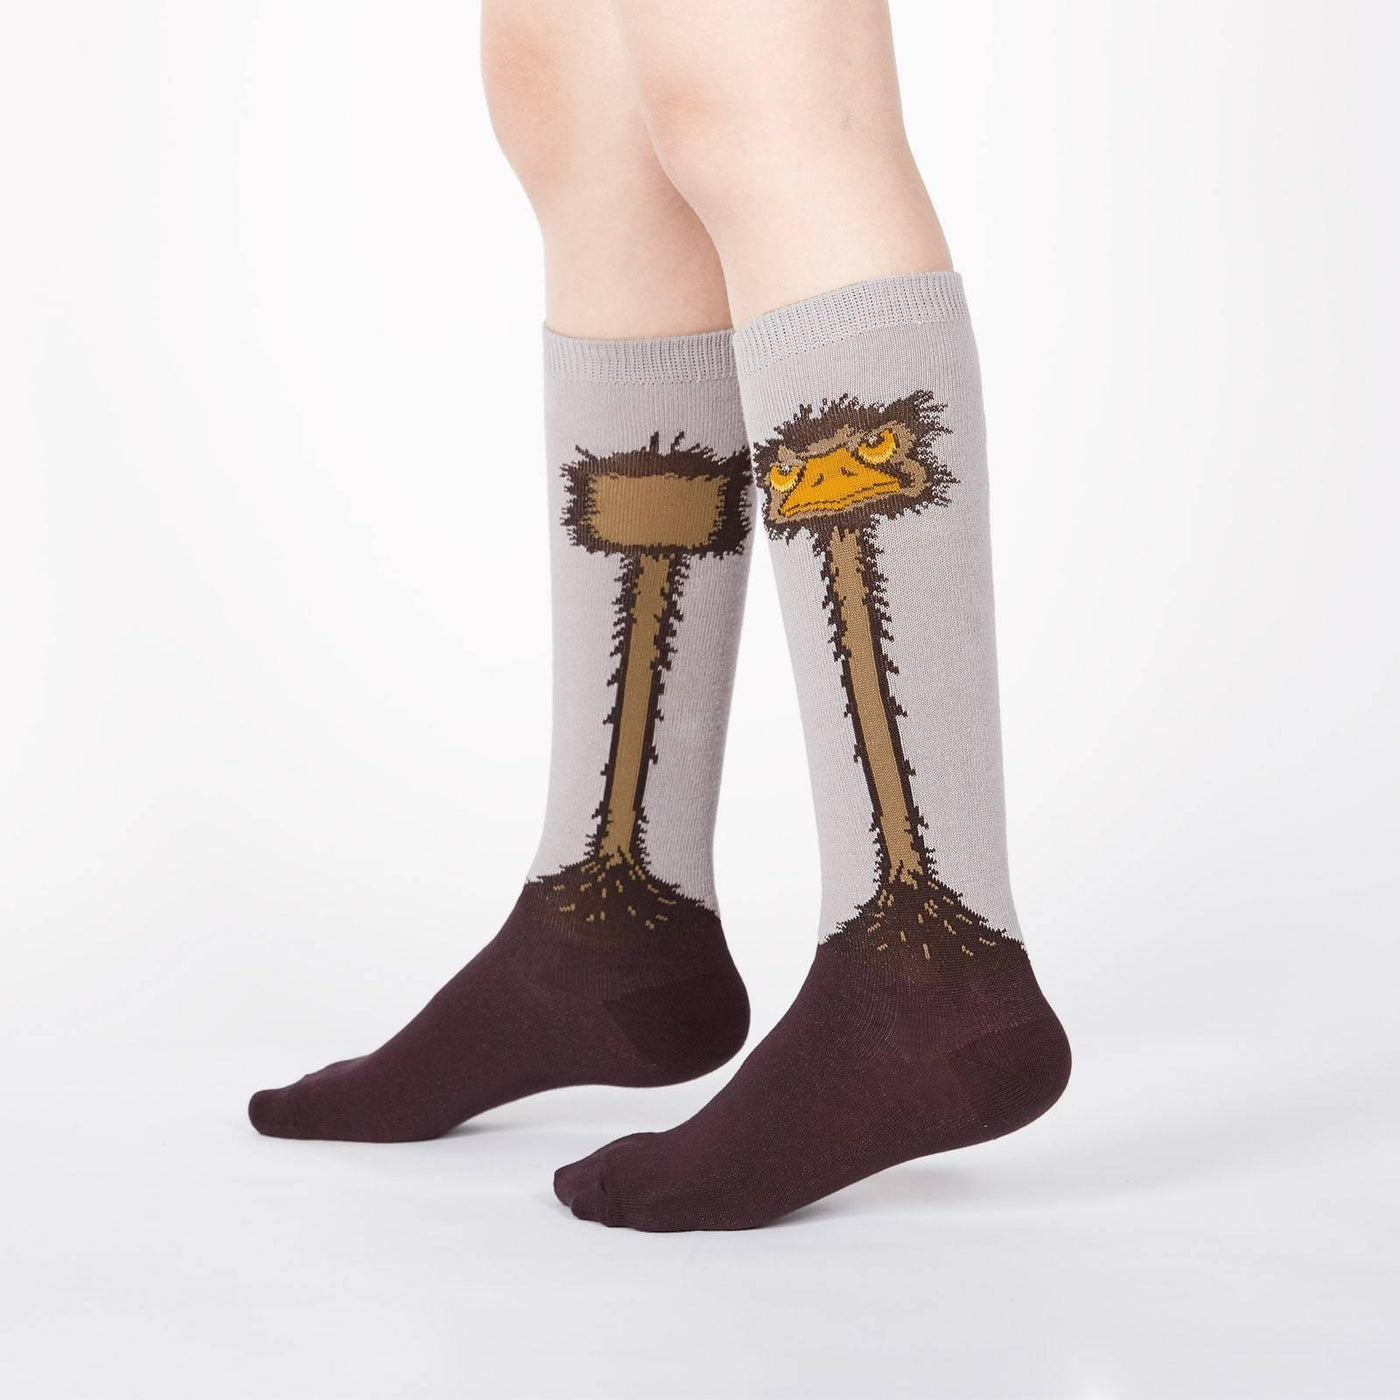 Ostrich, Youth Knee-high - Sock It To Me - The Sock Monster